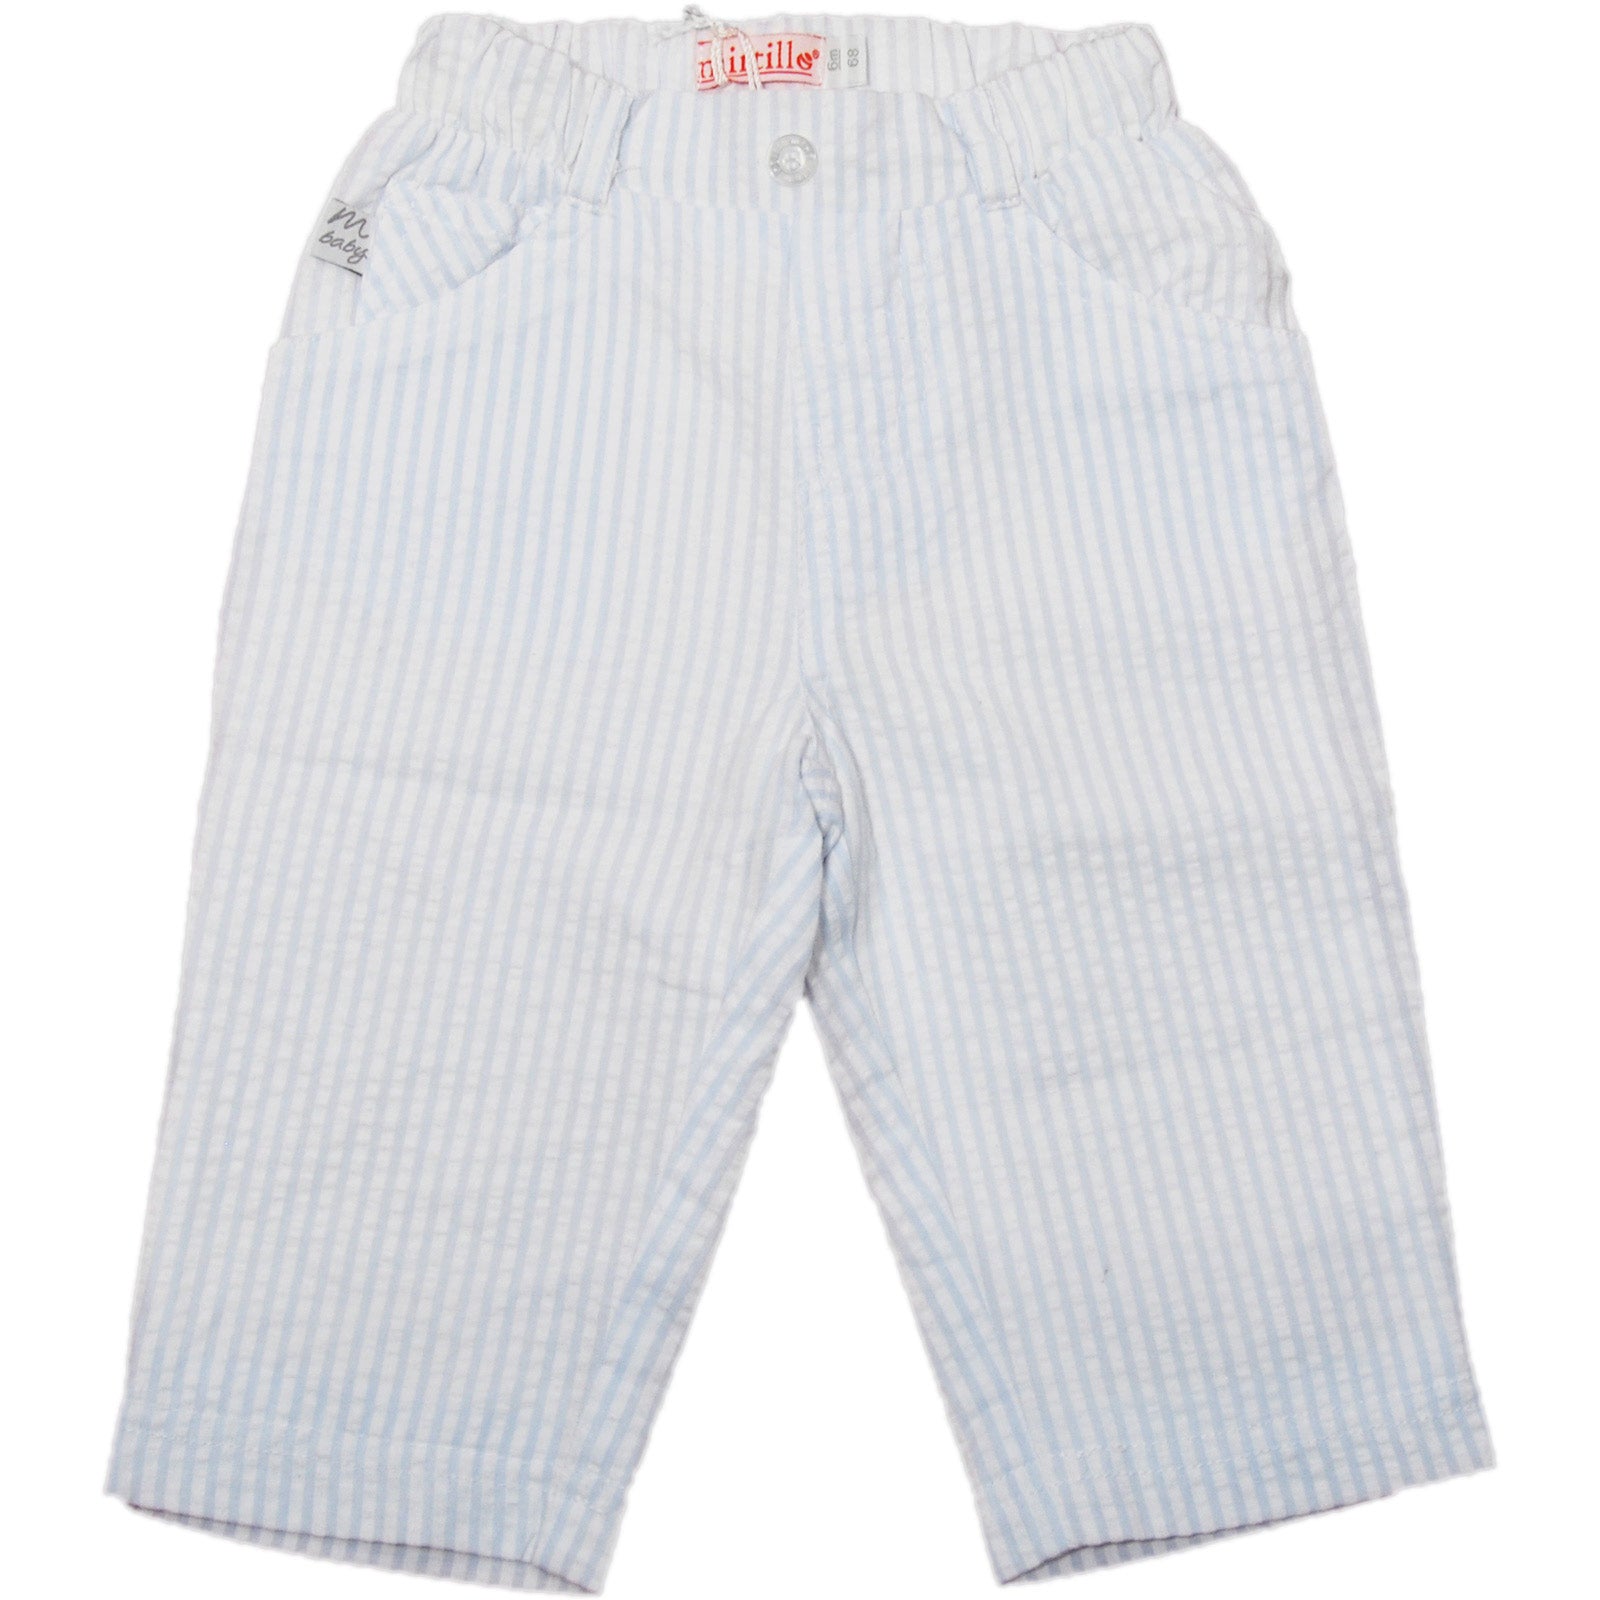 
  Boy's clothing line Mirtillo pants in striped cotton, white and light blue, with inner lining....